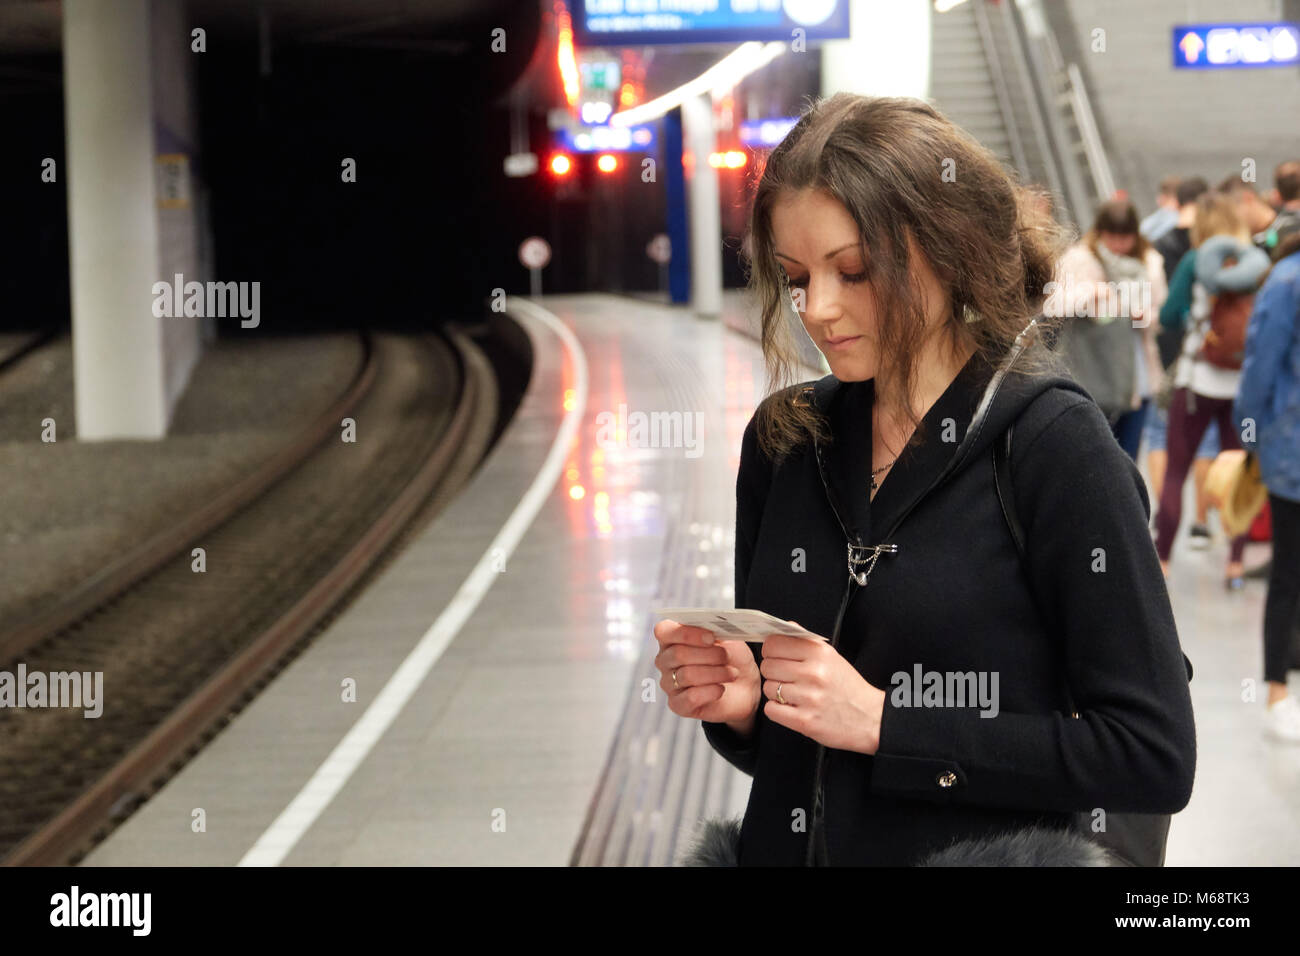 The girl passenger with a ticket in hand waiting for subway train. People in the background. Stock Photo